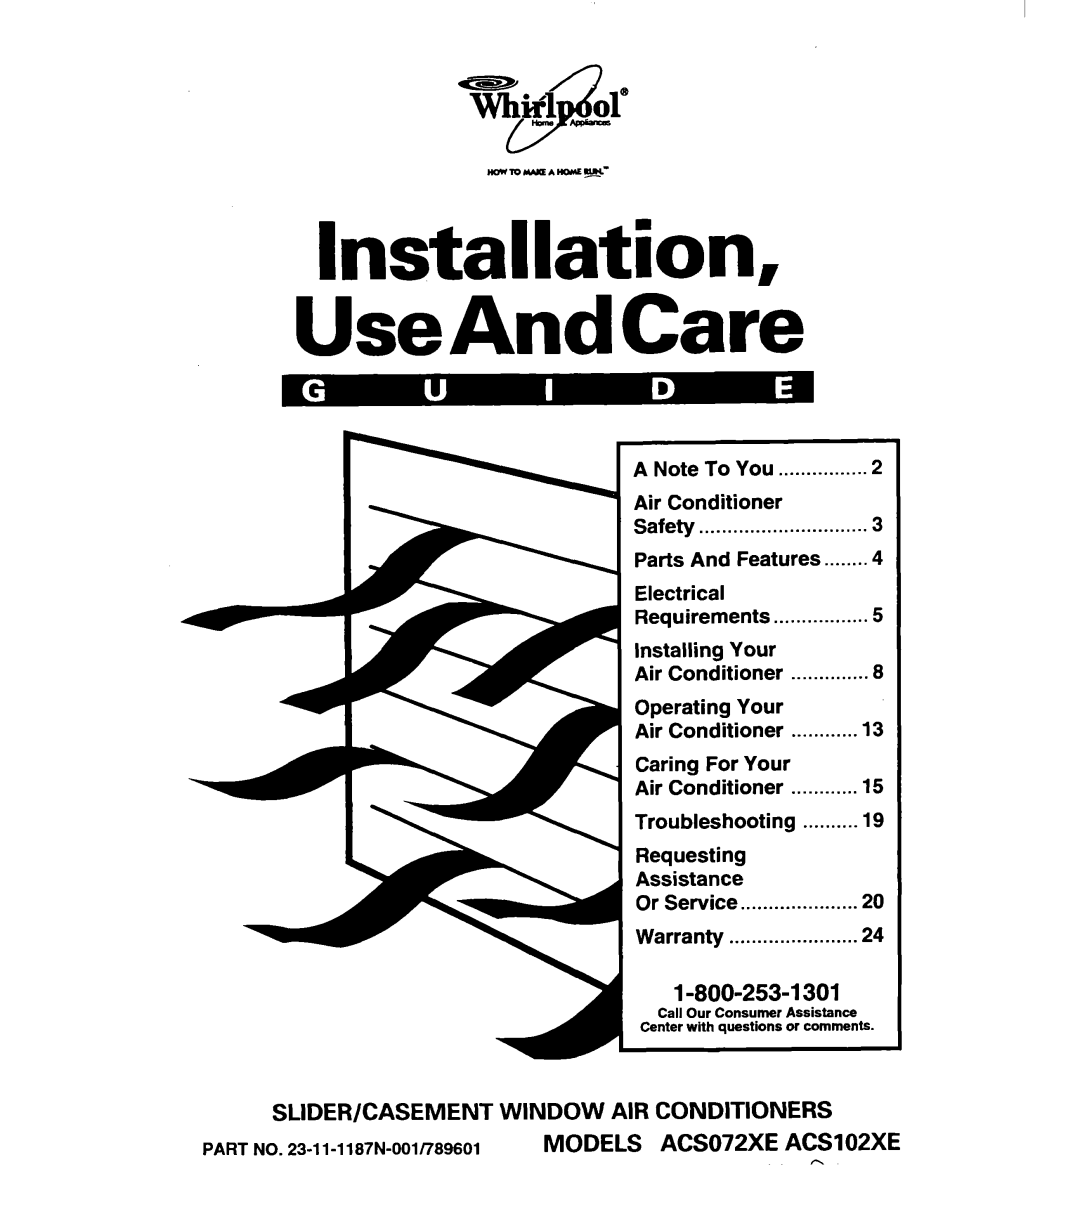 Whirlpool ACSl02XE, ACS072XE warranty Installation UseAndCare, I-800-253-1301, Slider/Casement Window Air Conditioners 